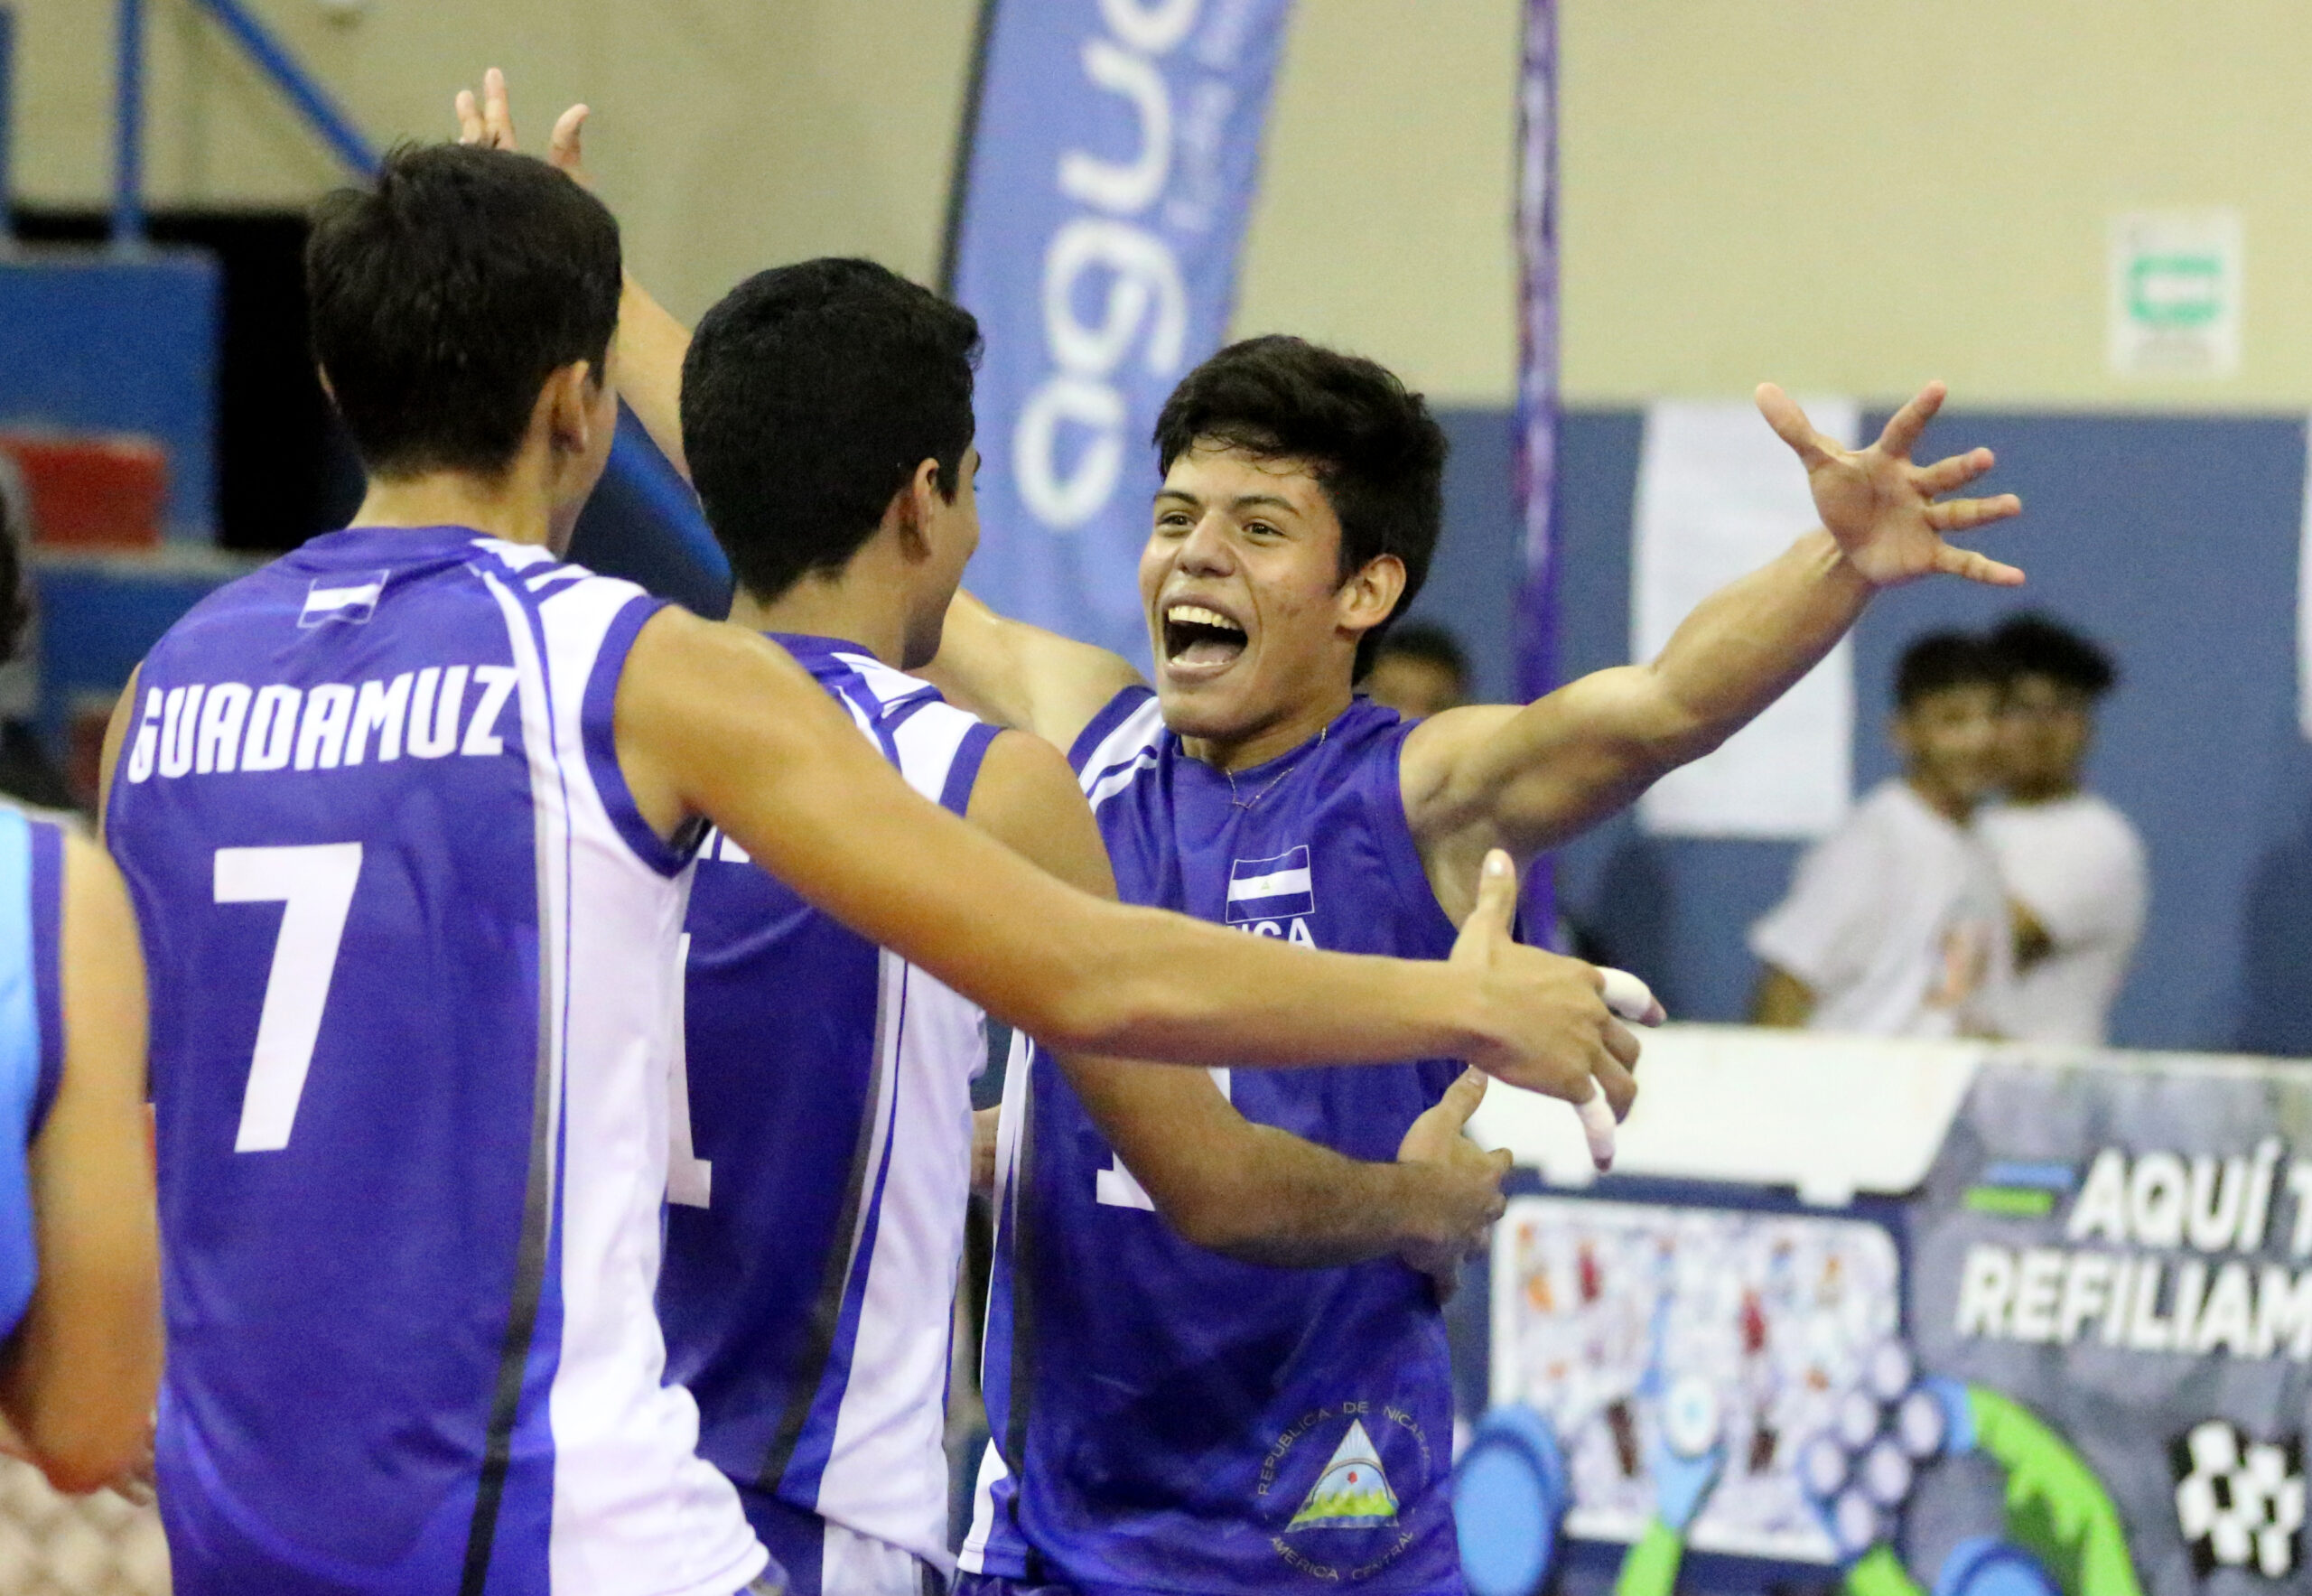 Nicaragua comes from behind to beat Belize in five sets